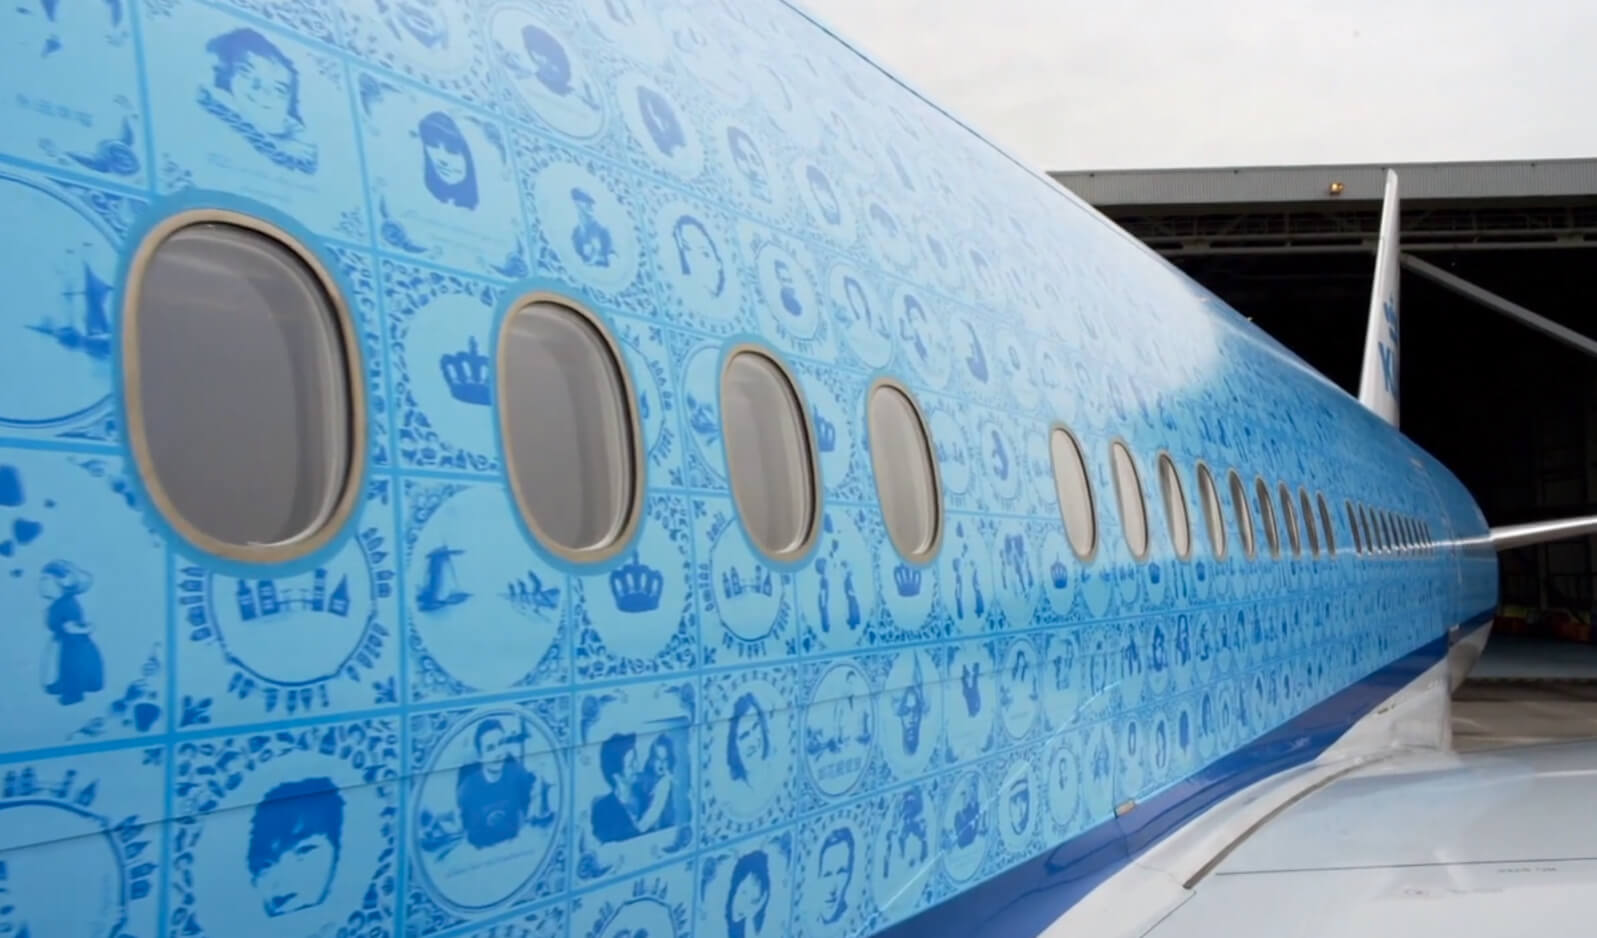 KLM – Tile And Inspire